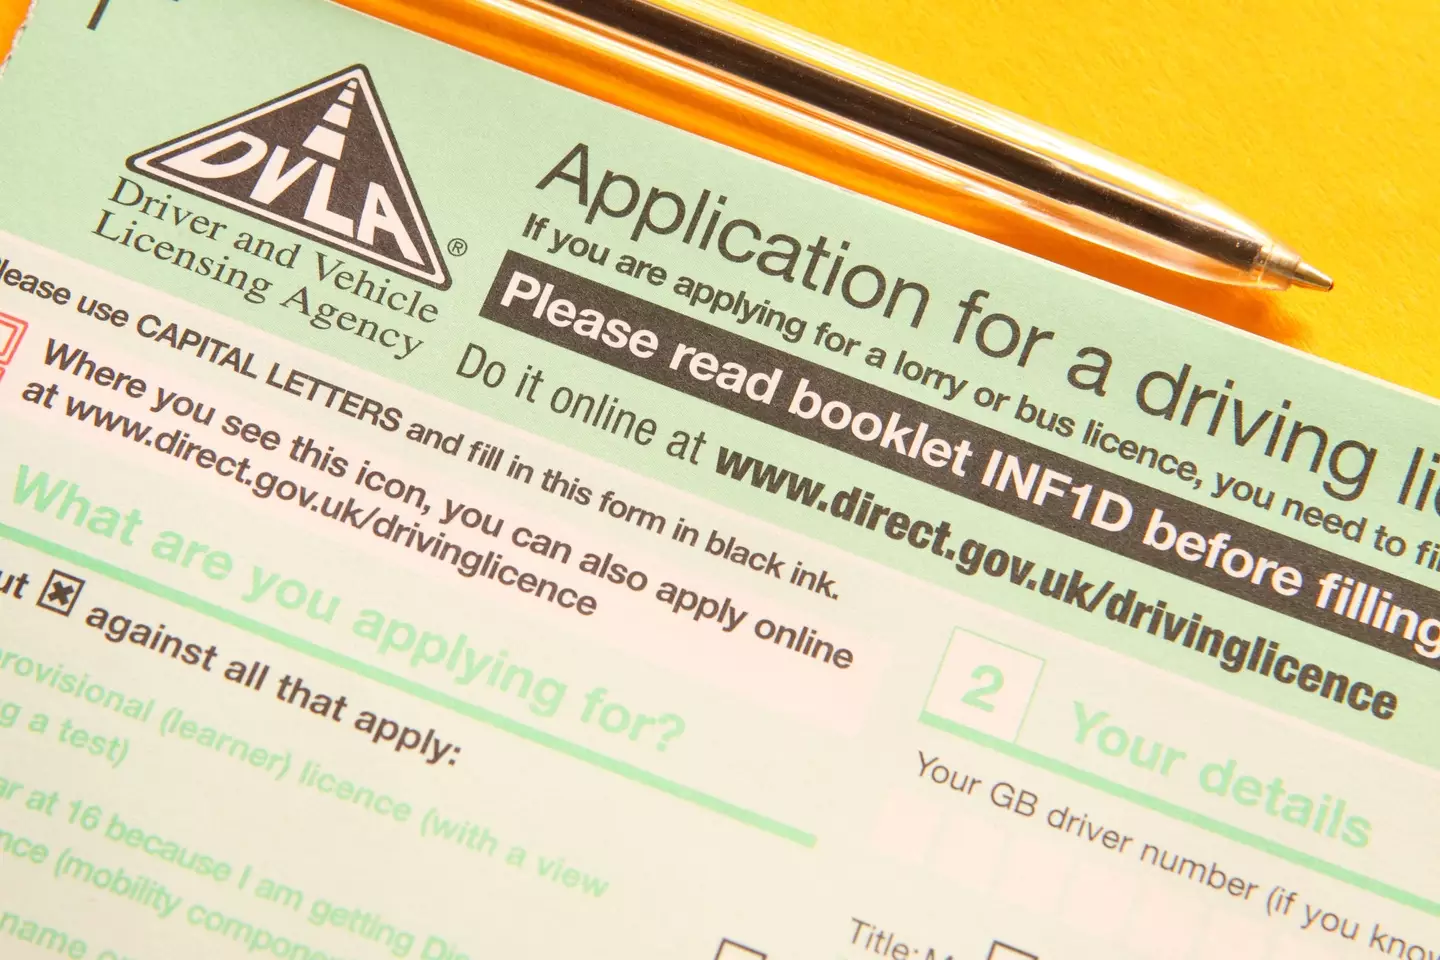 Frustrated drivers are reporting waits of 'up to a year' for paper-based applications and renewals (